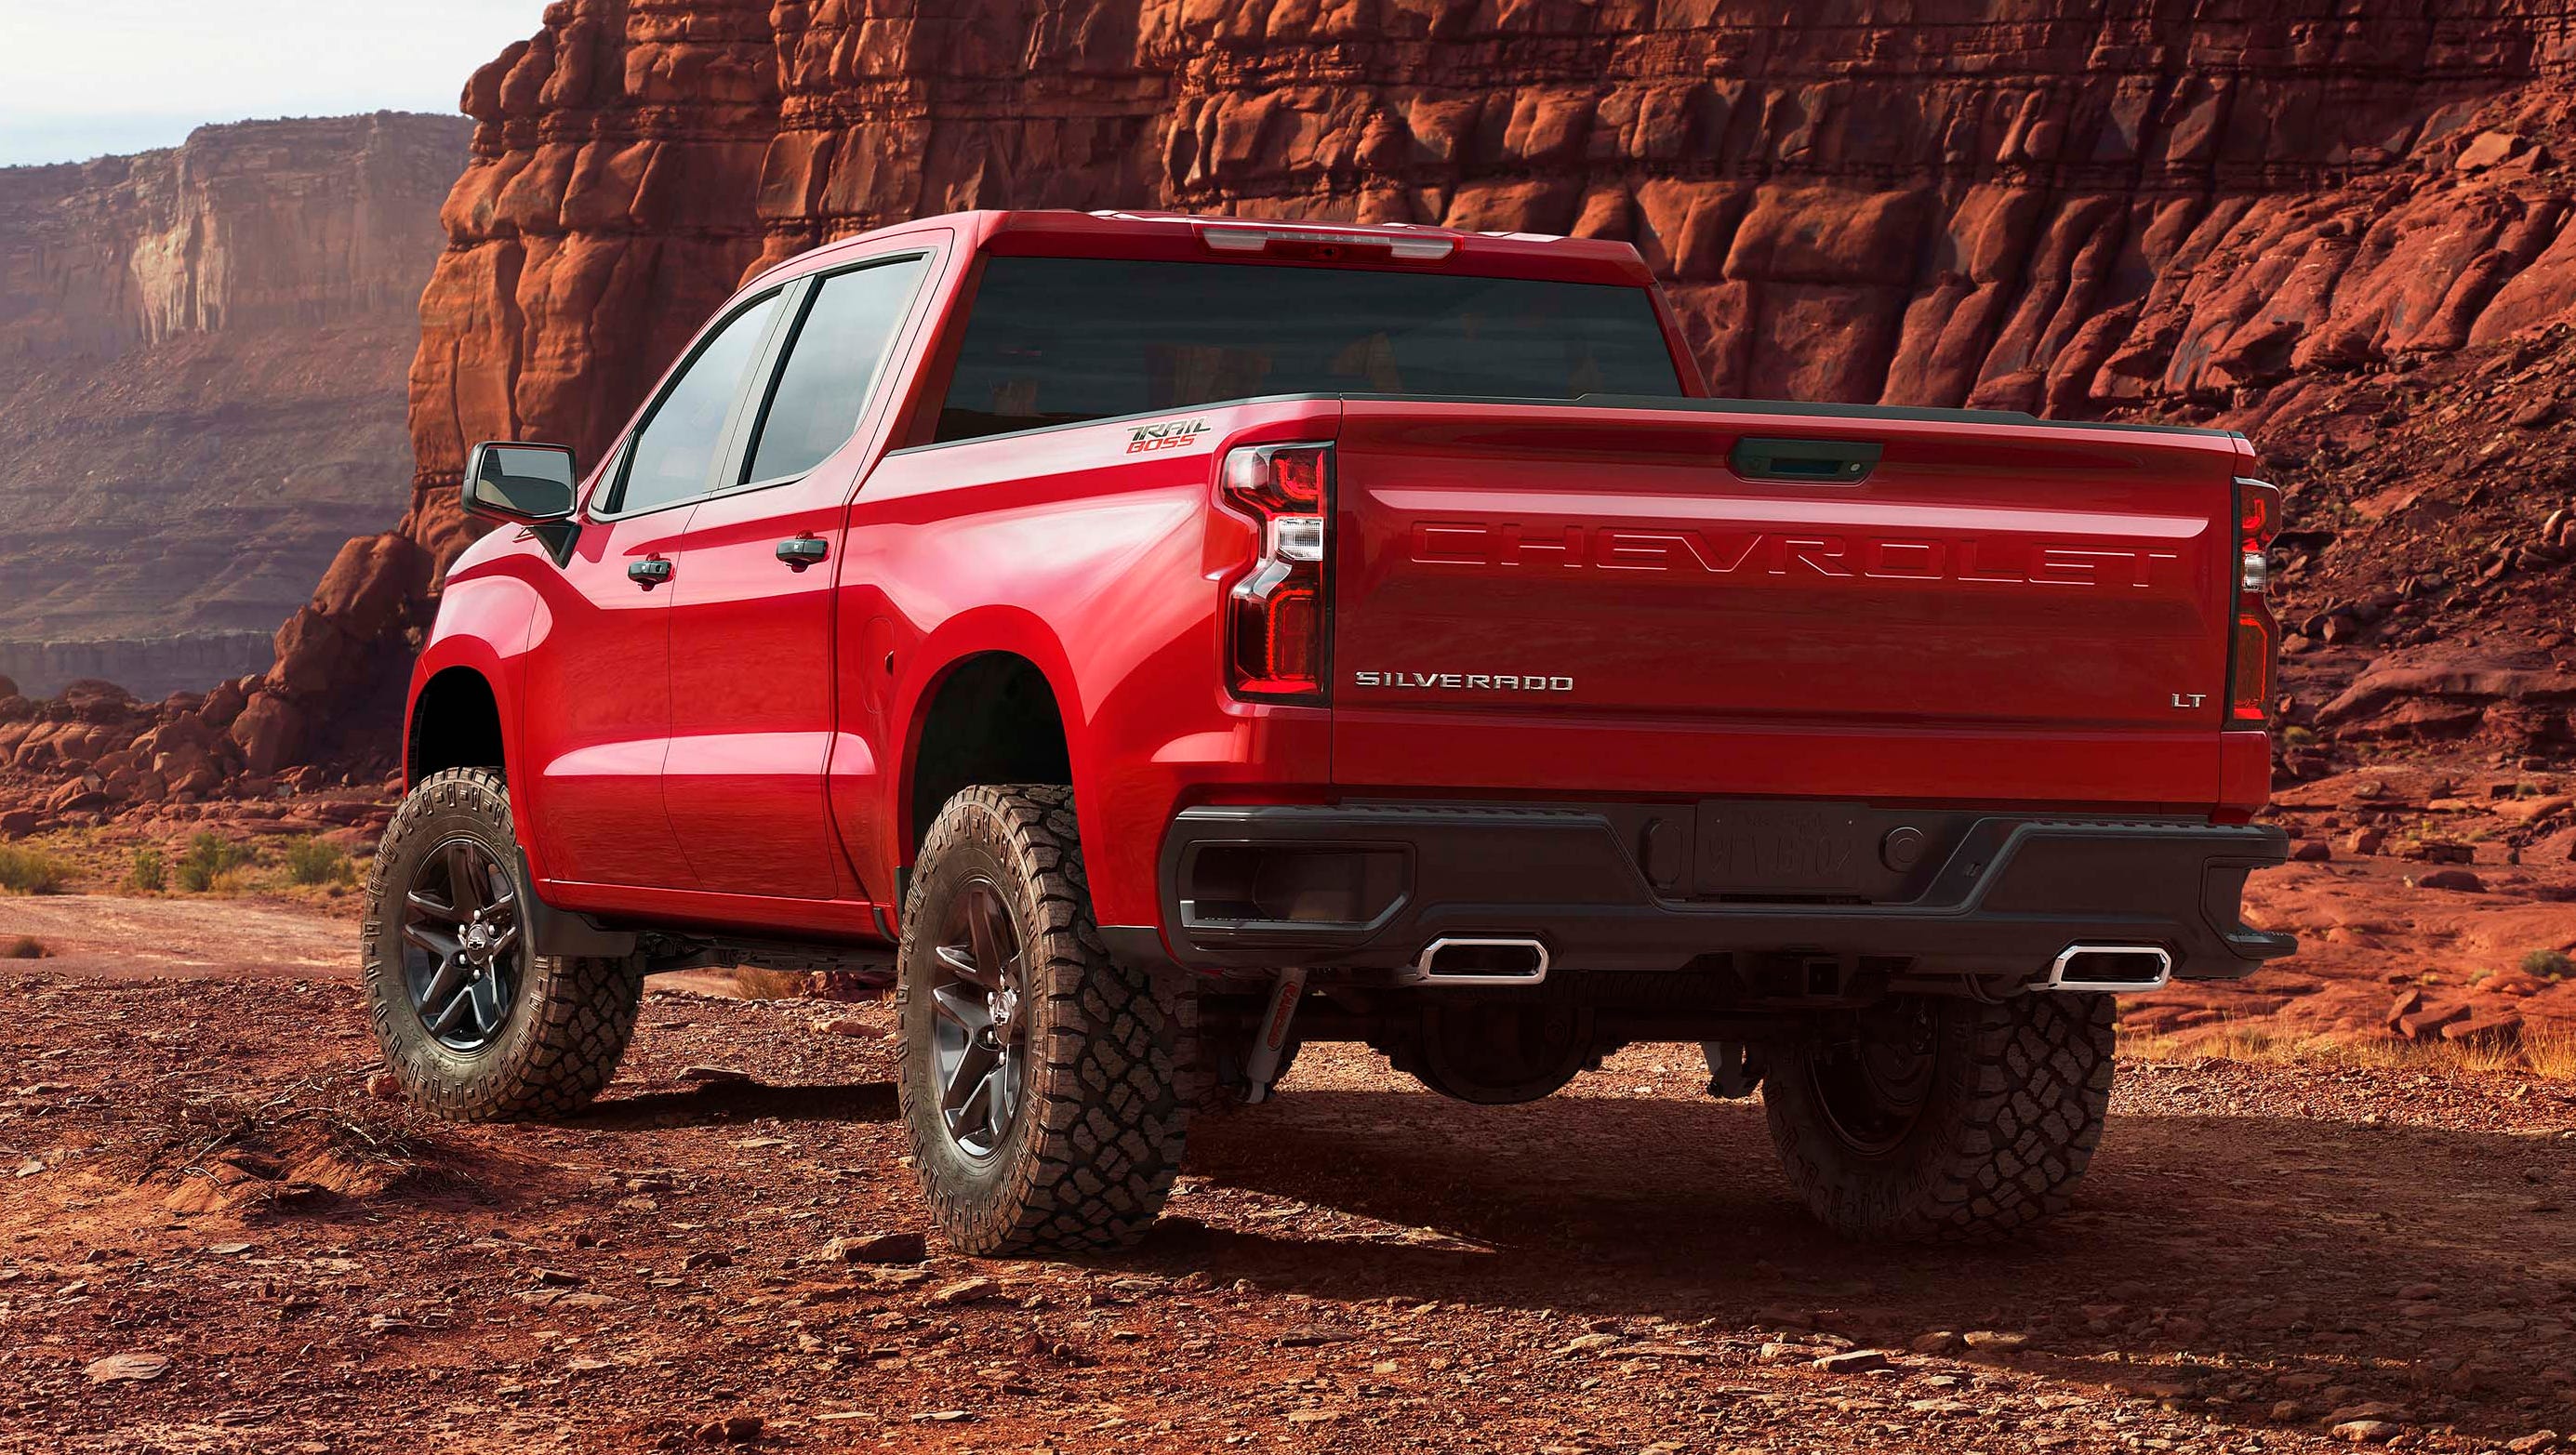 The rear of the all-new Chevy Silverado maintains the brands' signature vertical taillights and corner bumper step. New for '19 - "Chevrolet" gets stamped across the tailgate.